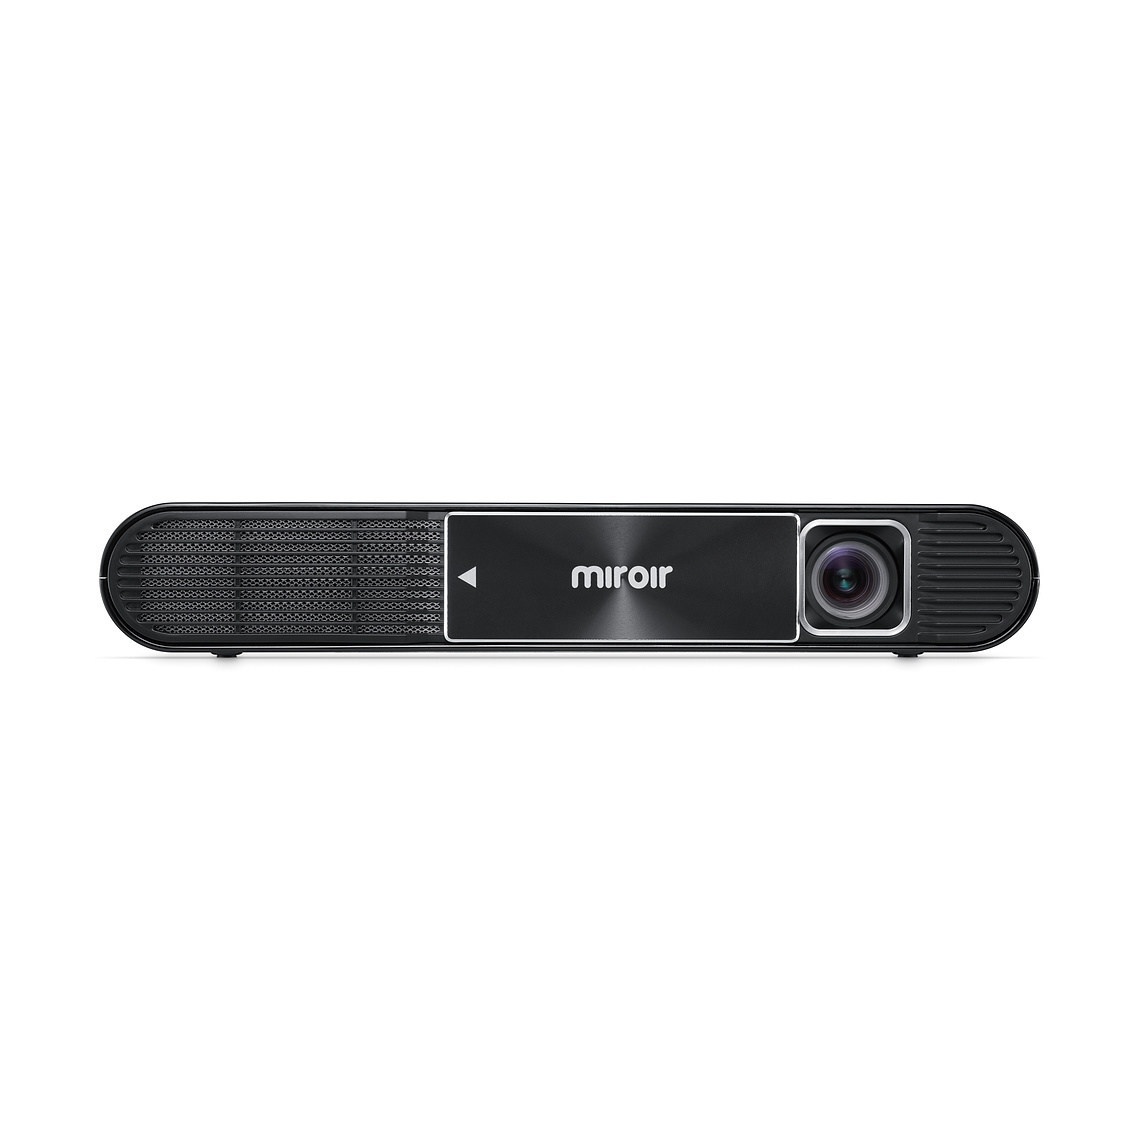 Miroir Releases Latest in Portable Projector Technology